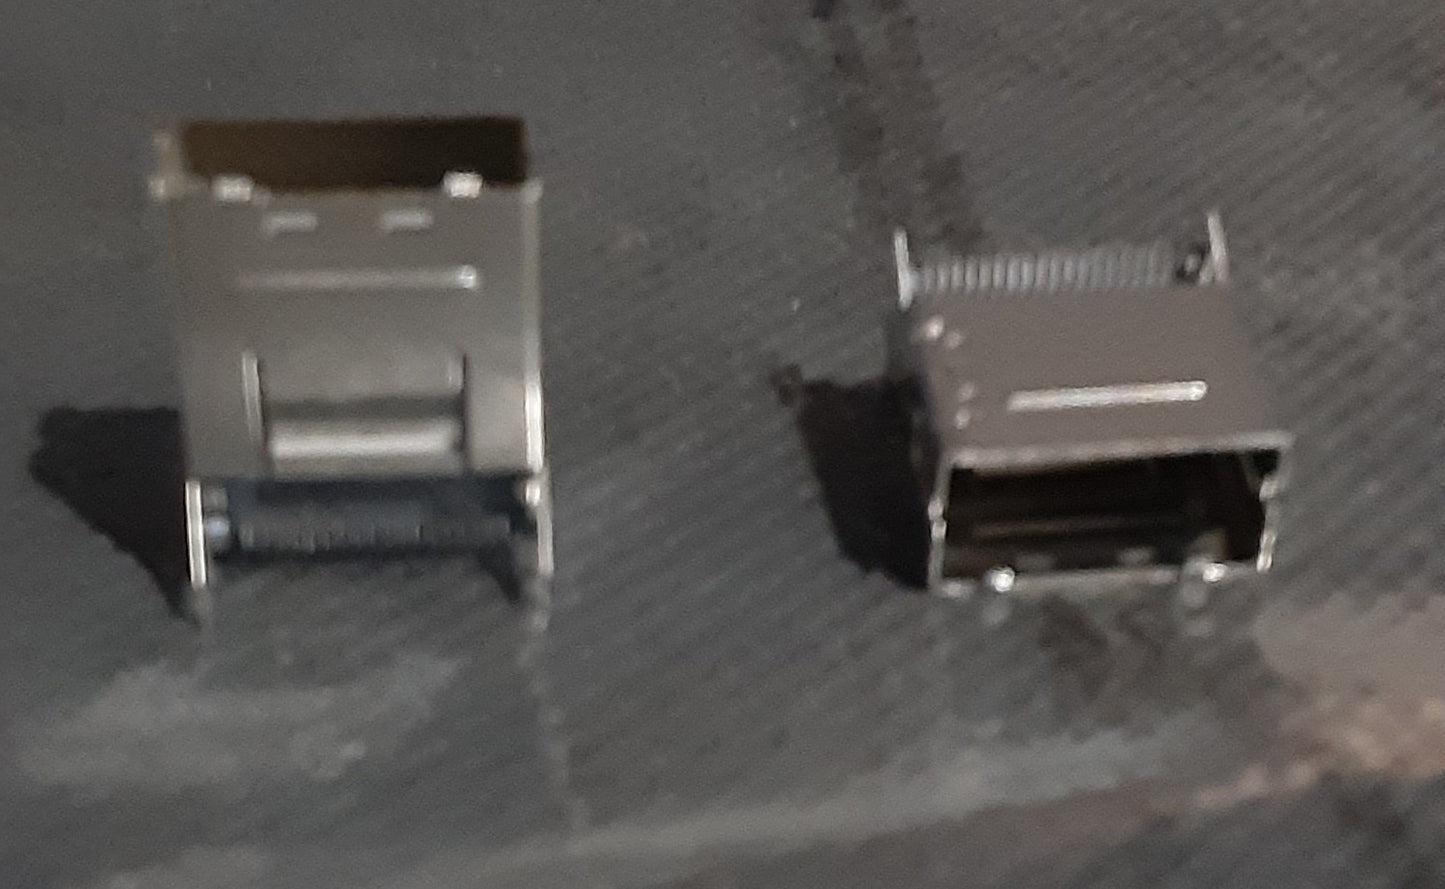 Jack Modular Connector 8p8c (RJ45, Ethernet) 90° Angle (Right) Shielded ES2179